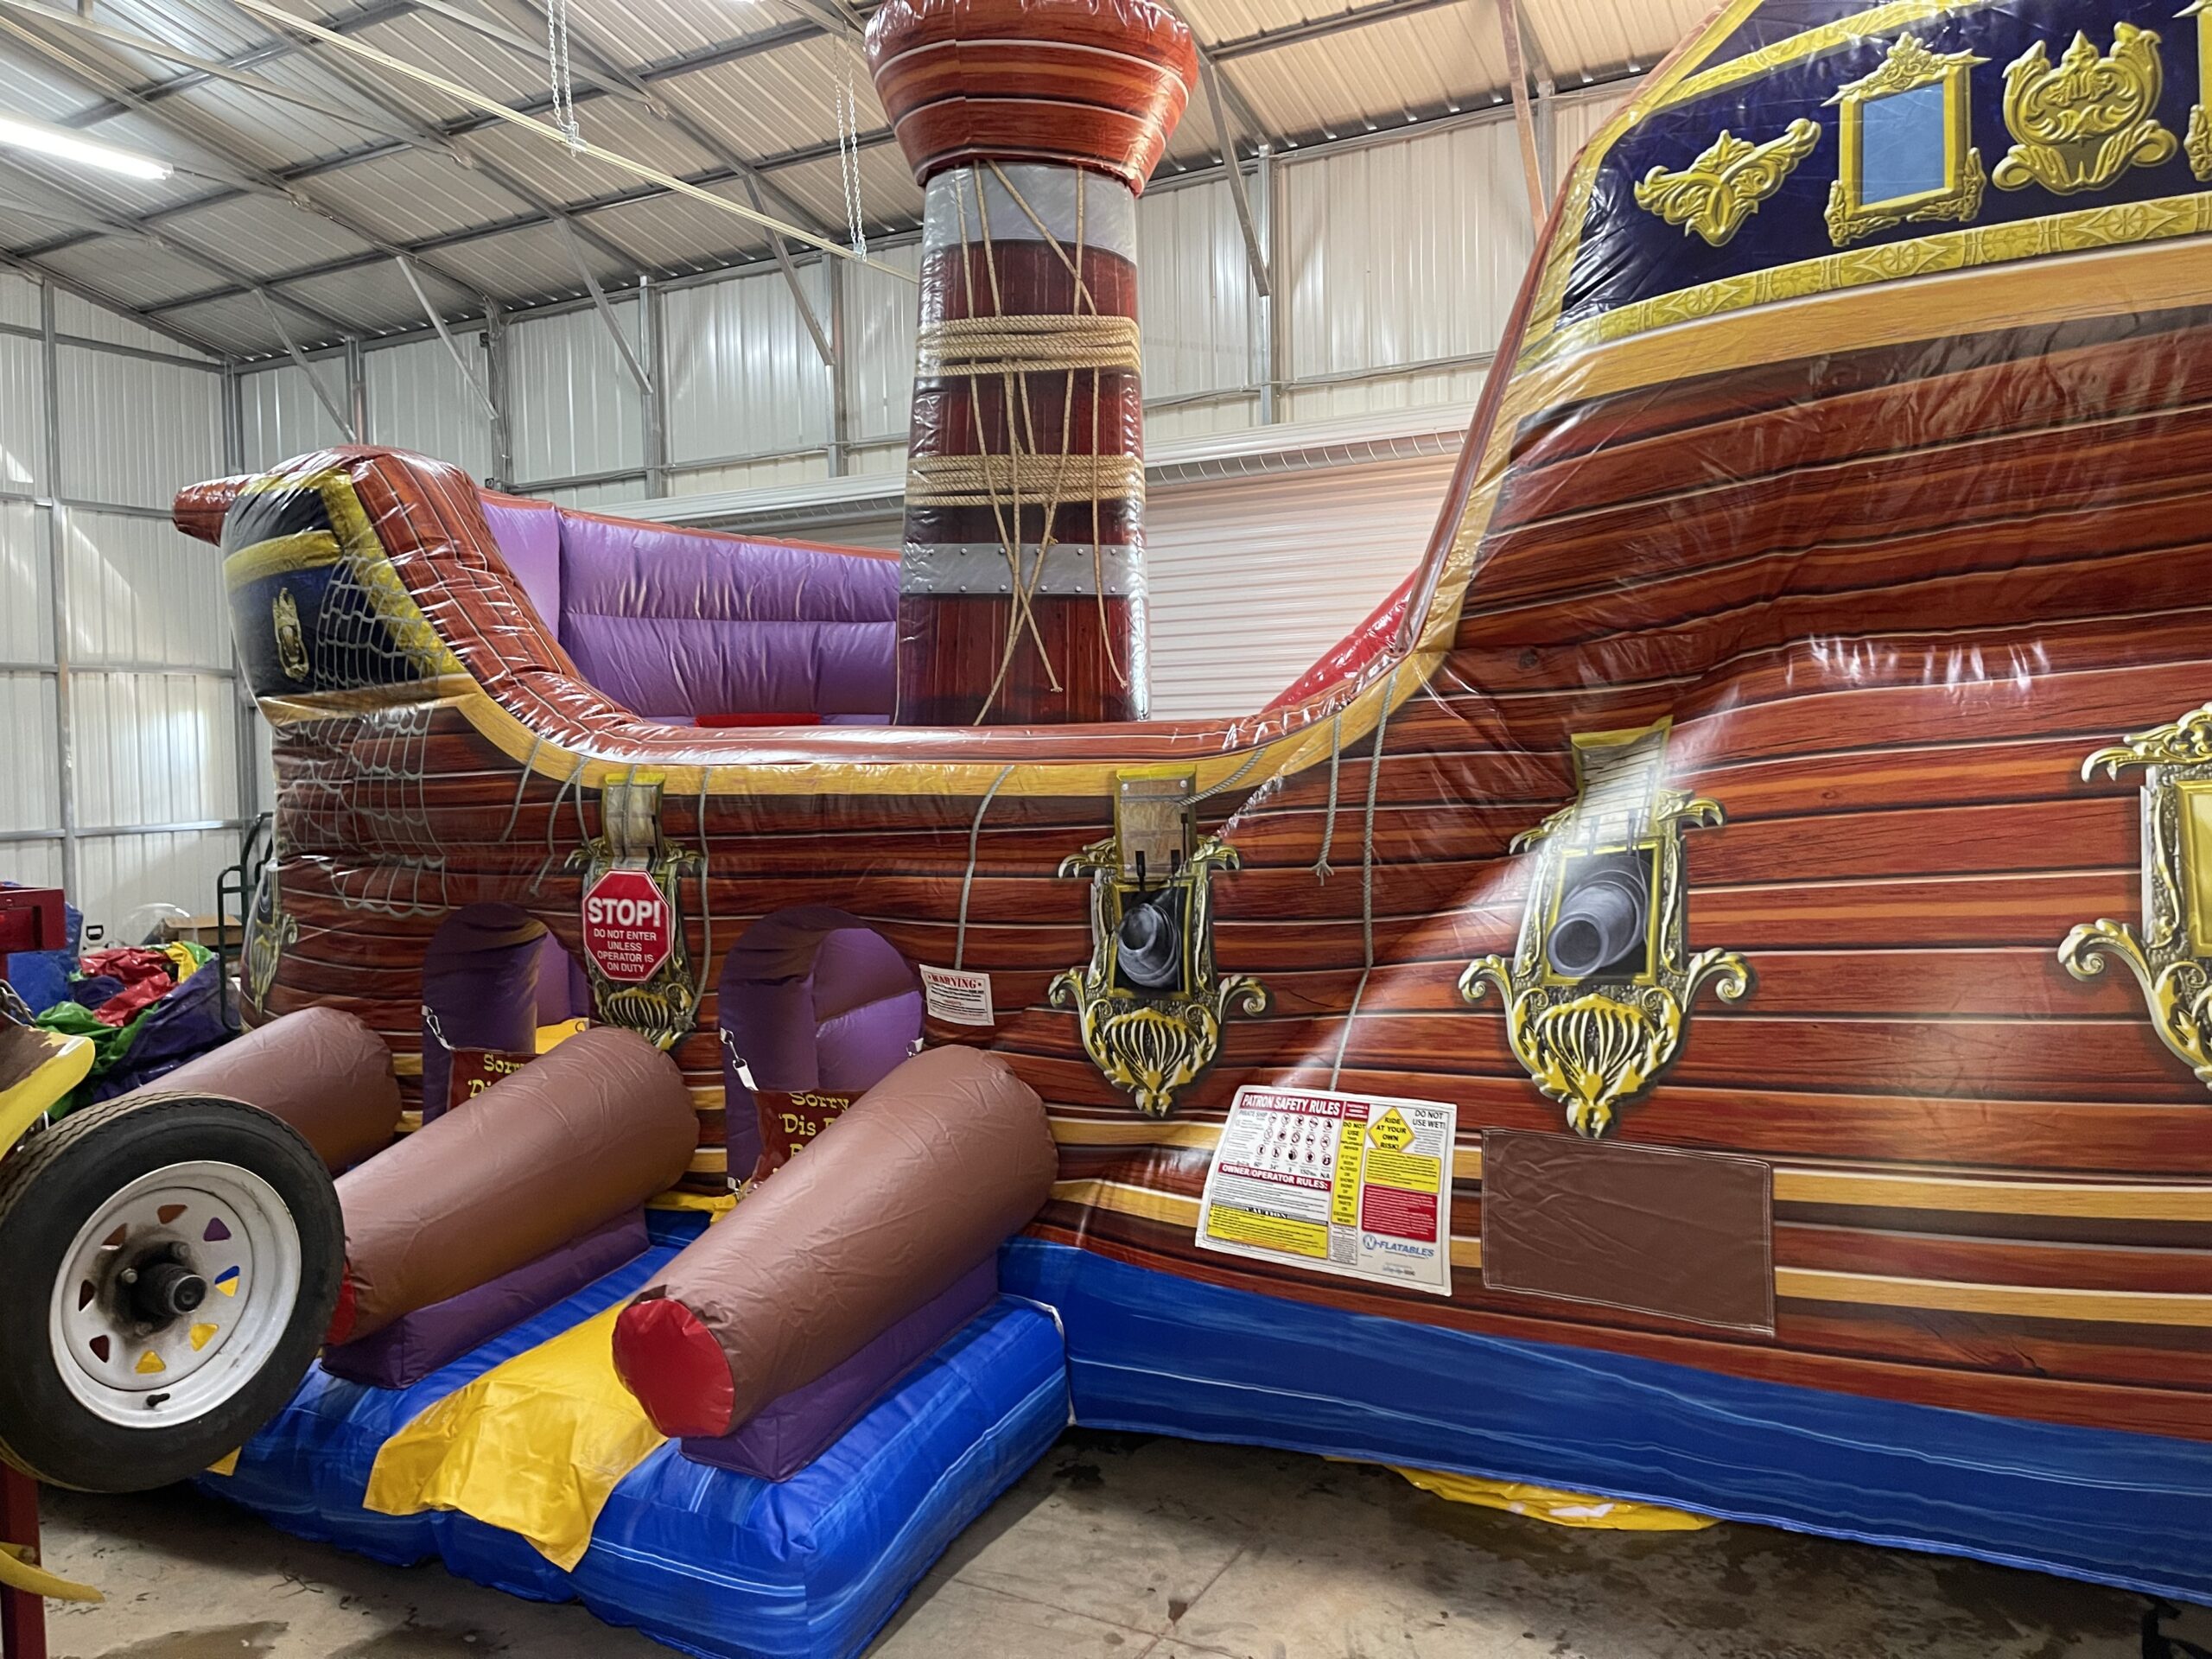 Pirate ship inflatable with slide.